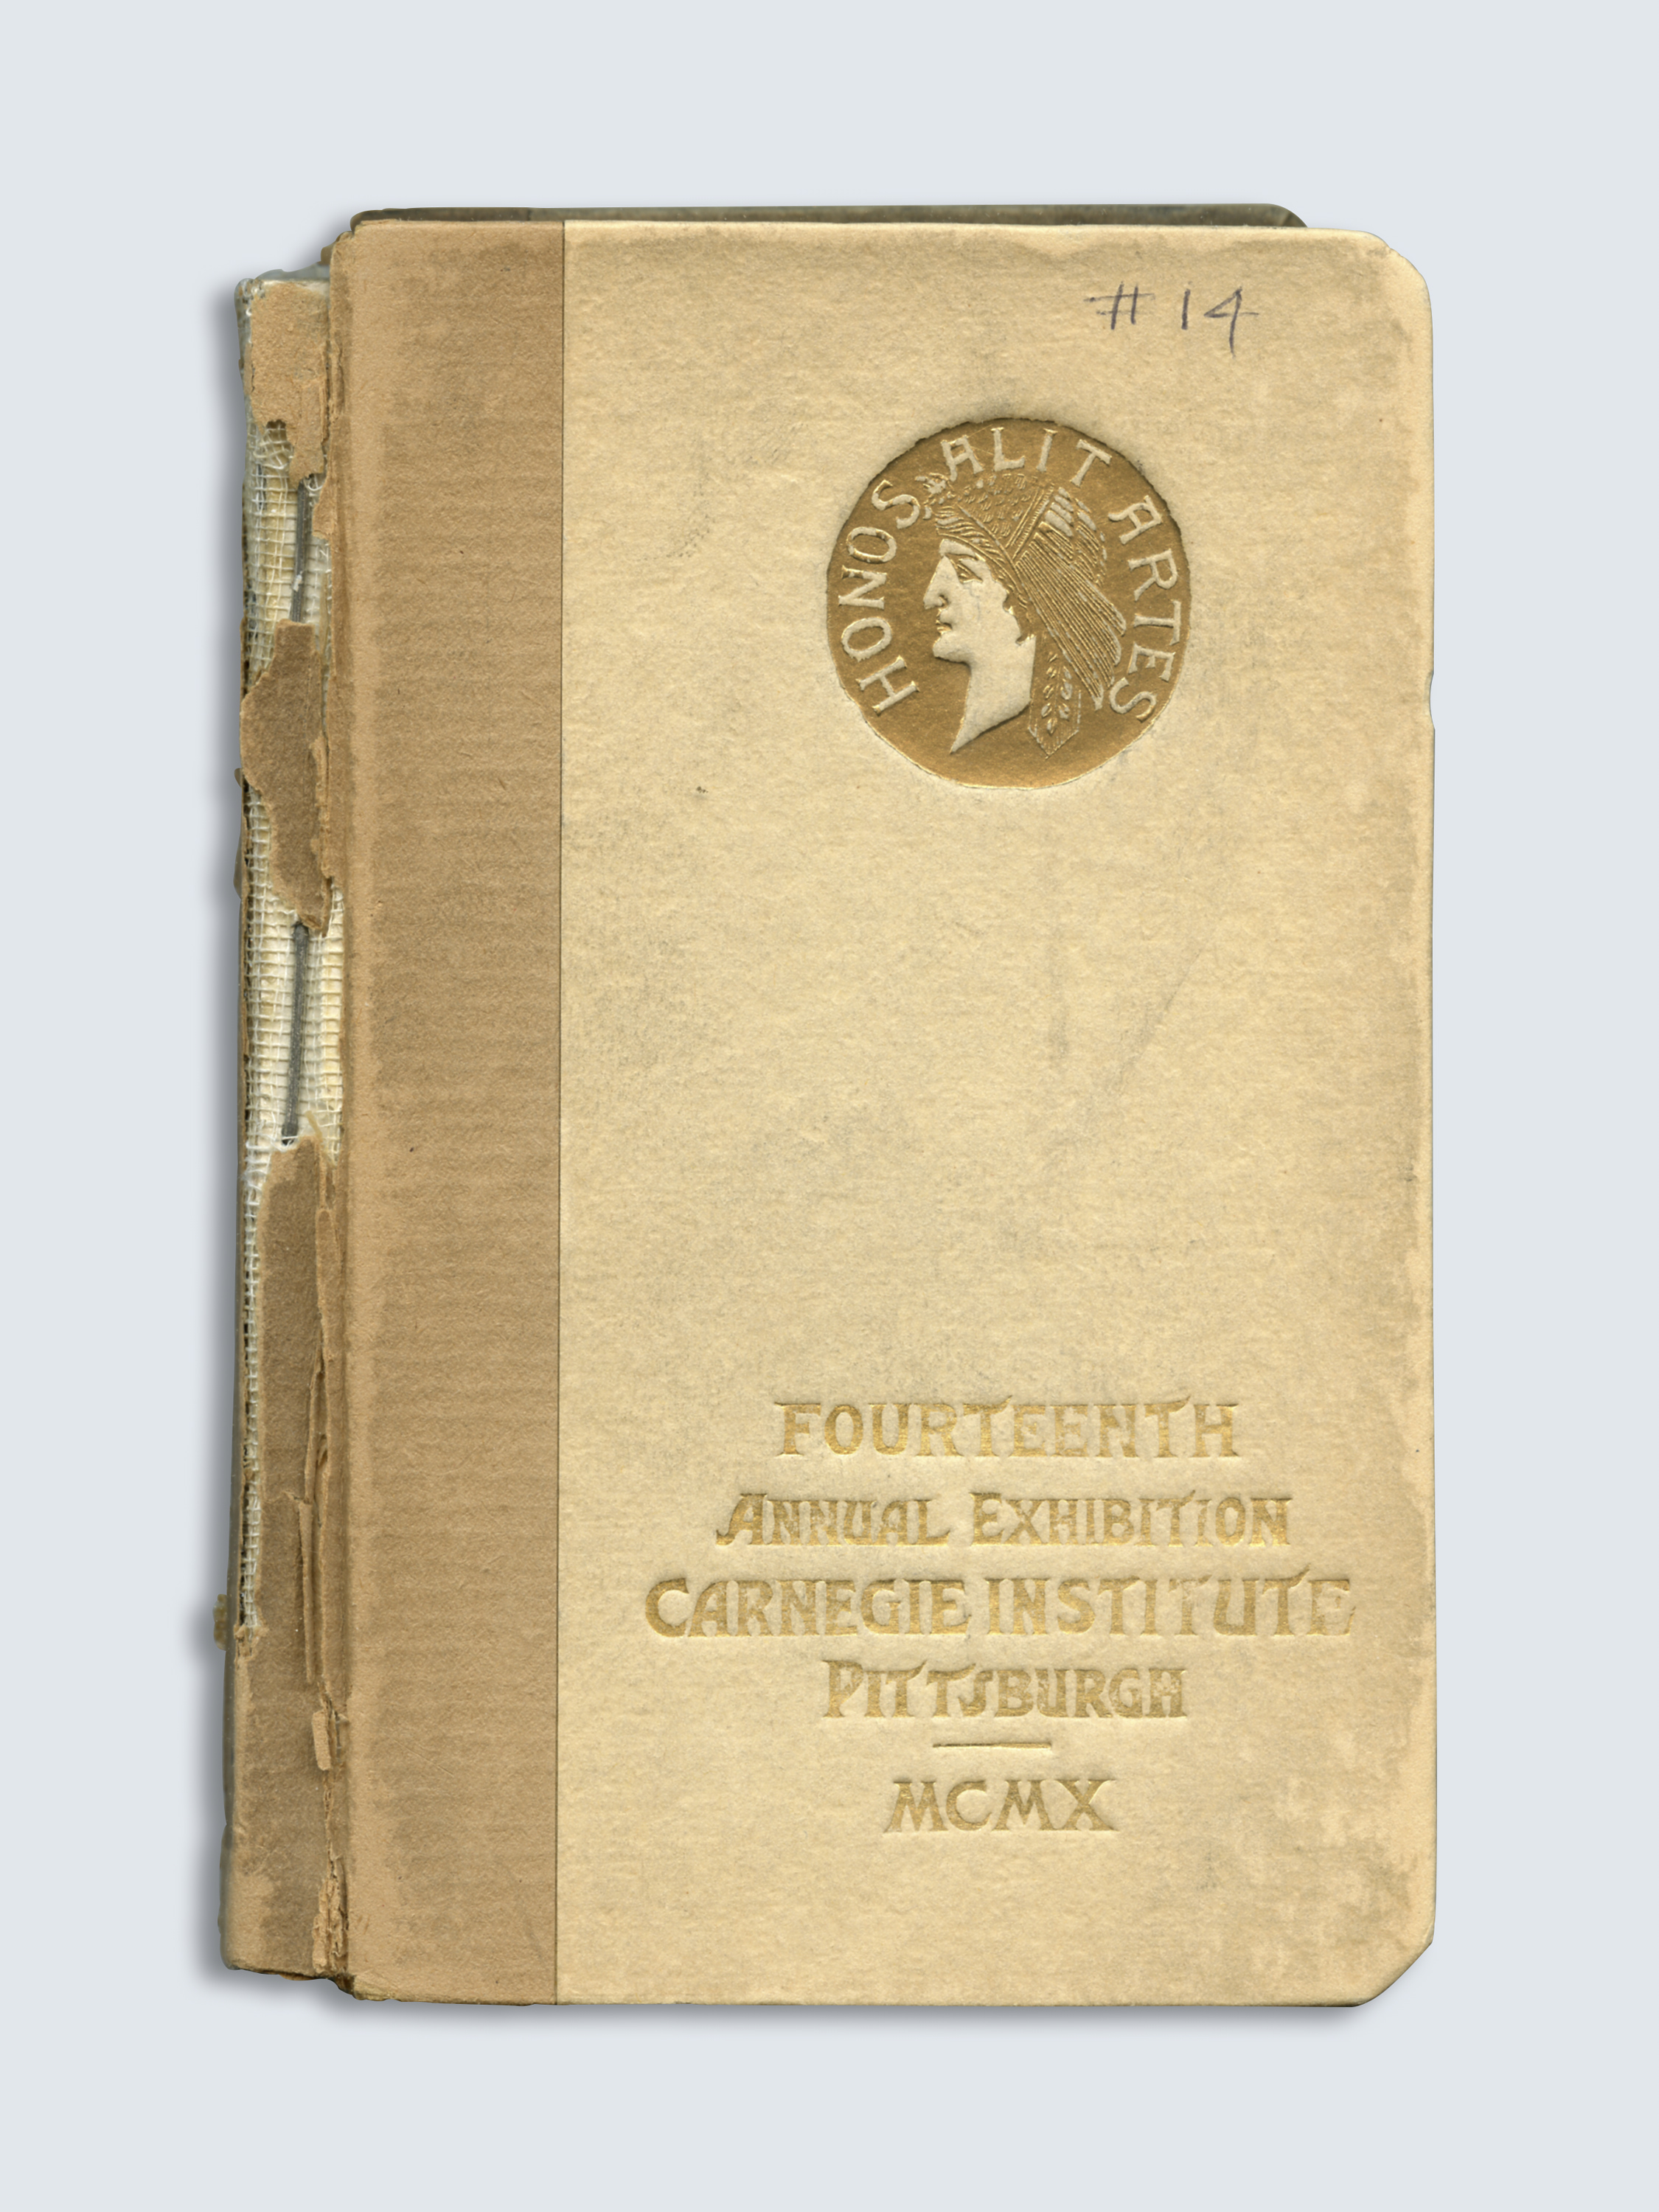 a book cover from the 14th carnegie international